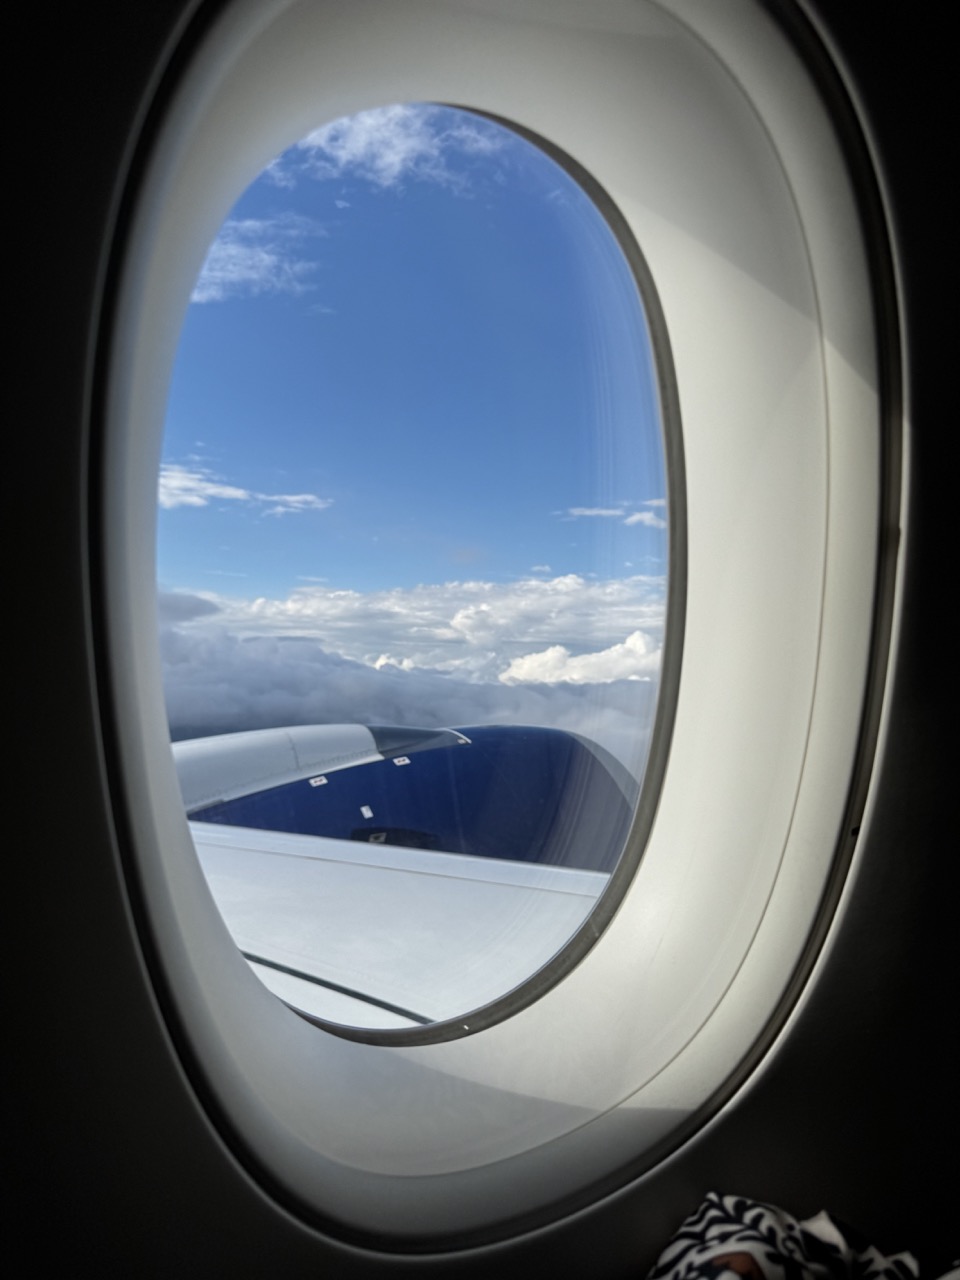 A spetacular view of the window of British Airways 246, a flight from São Paulo to London. The sky is bright with a couple of clouds. The wing of the plane is shining — this is a brand new aircraft.